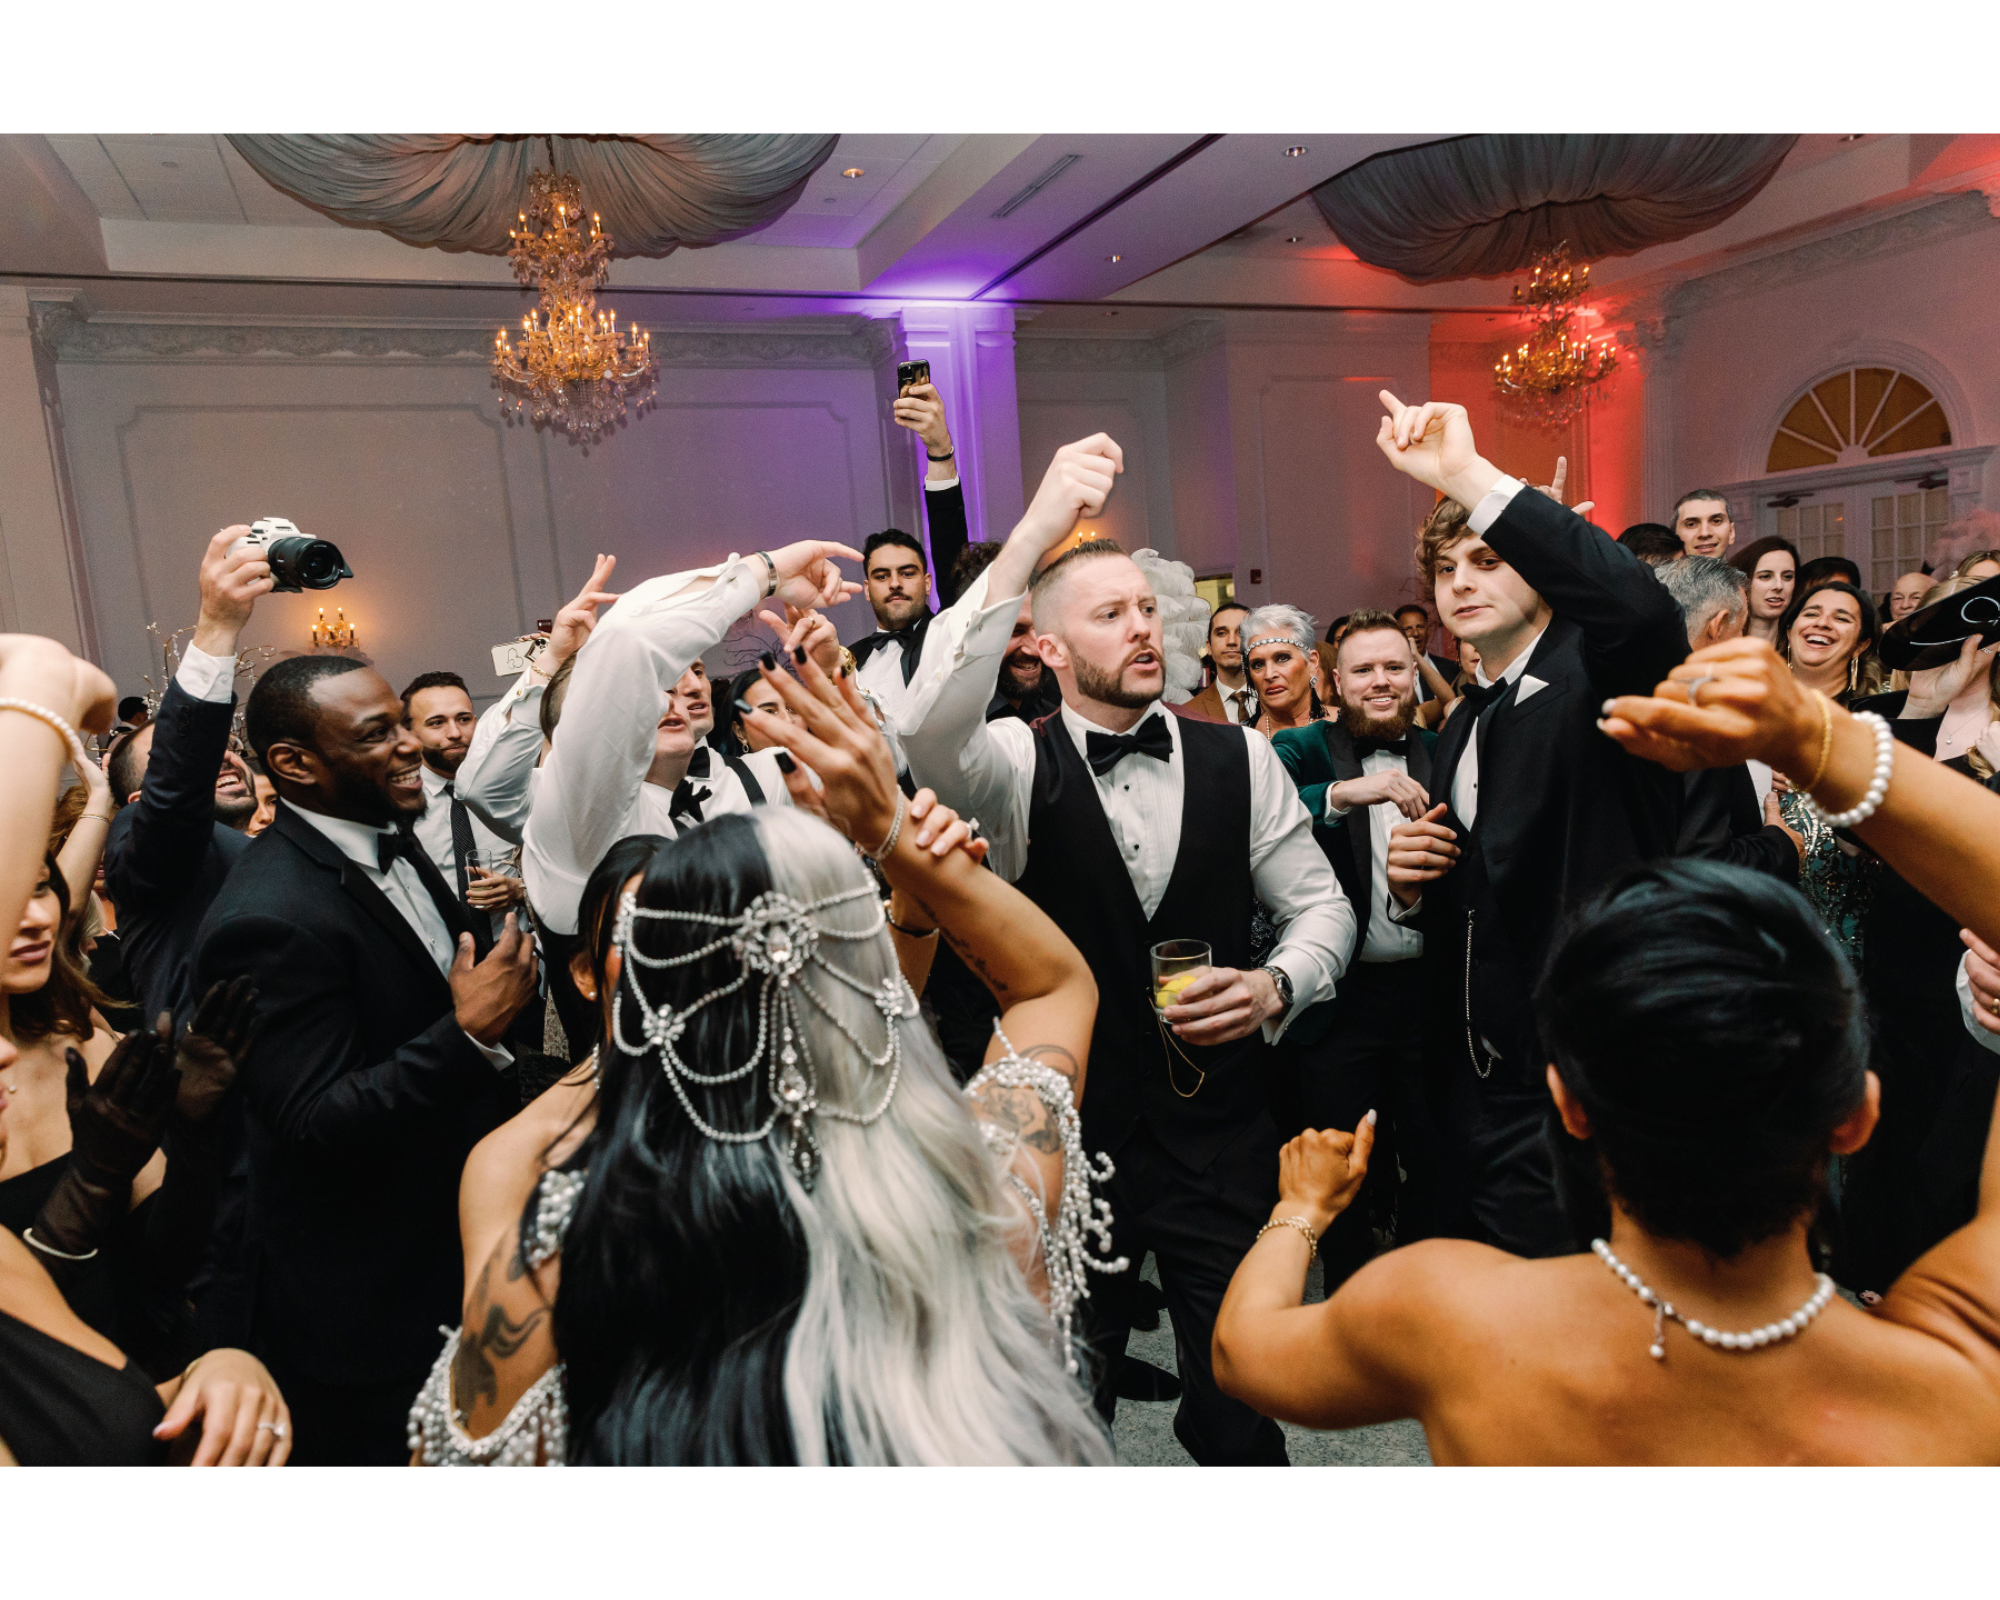 Great Gatsby-inspired bride dancing with her handsome groom. She's wearing a Swarovski-crystal bridal halo headpiece and beaded gown.